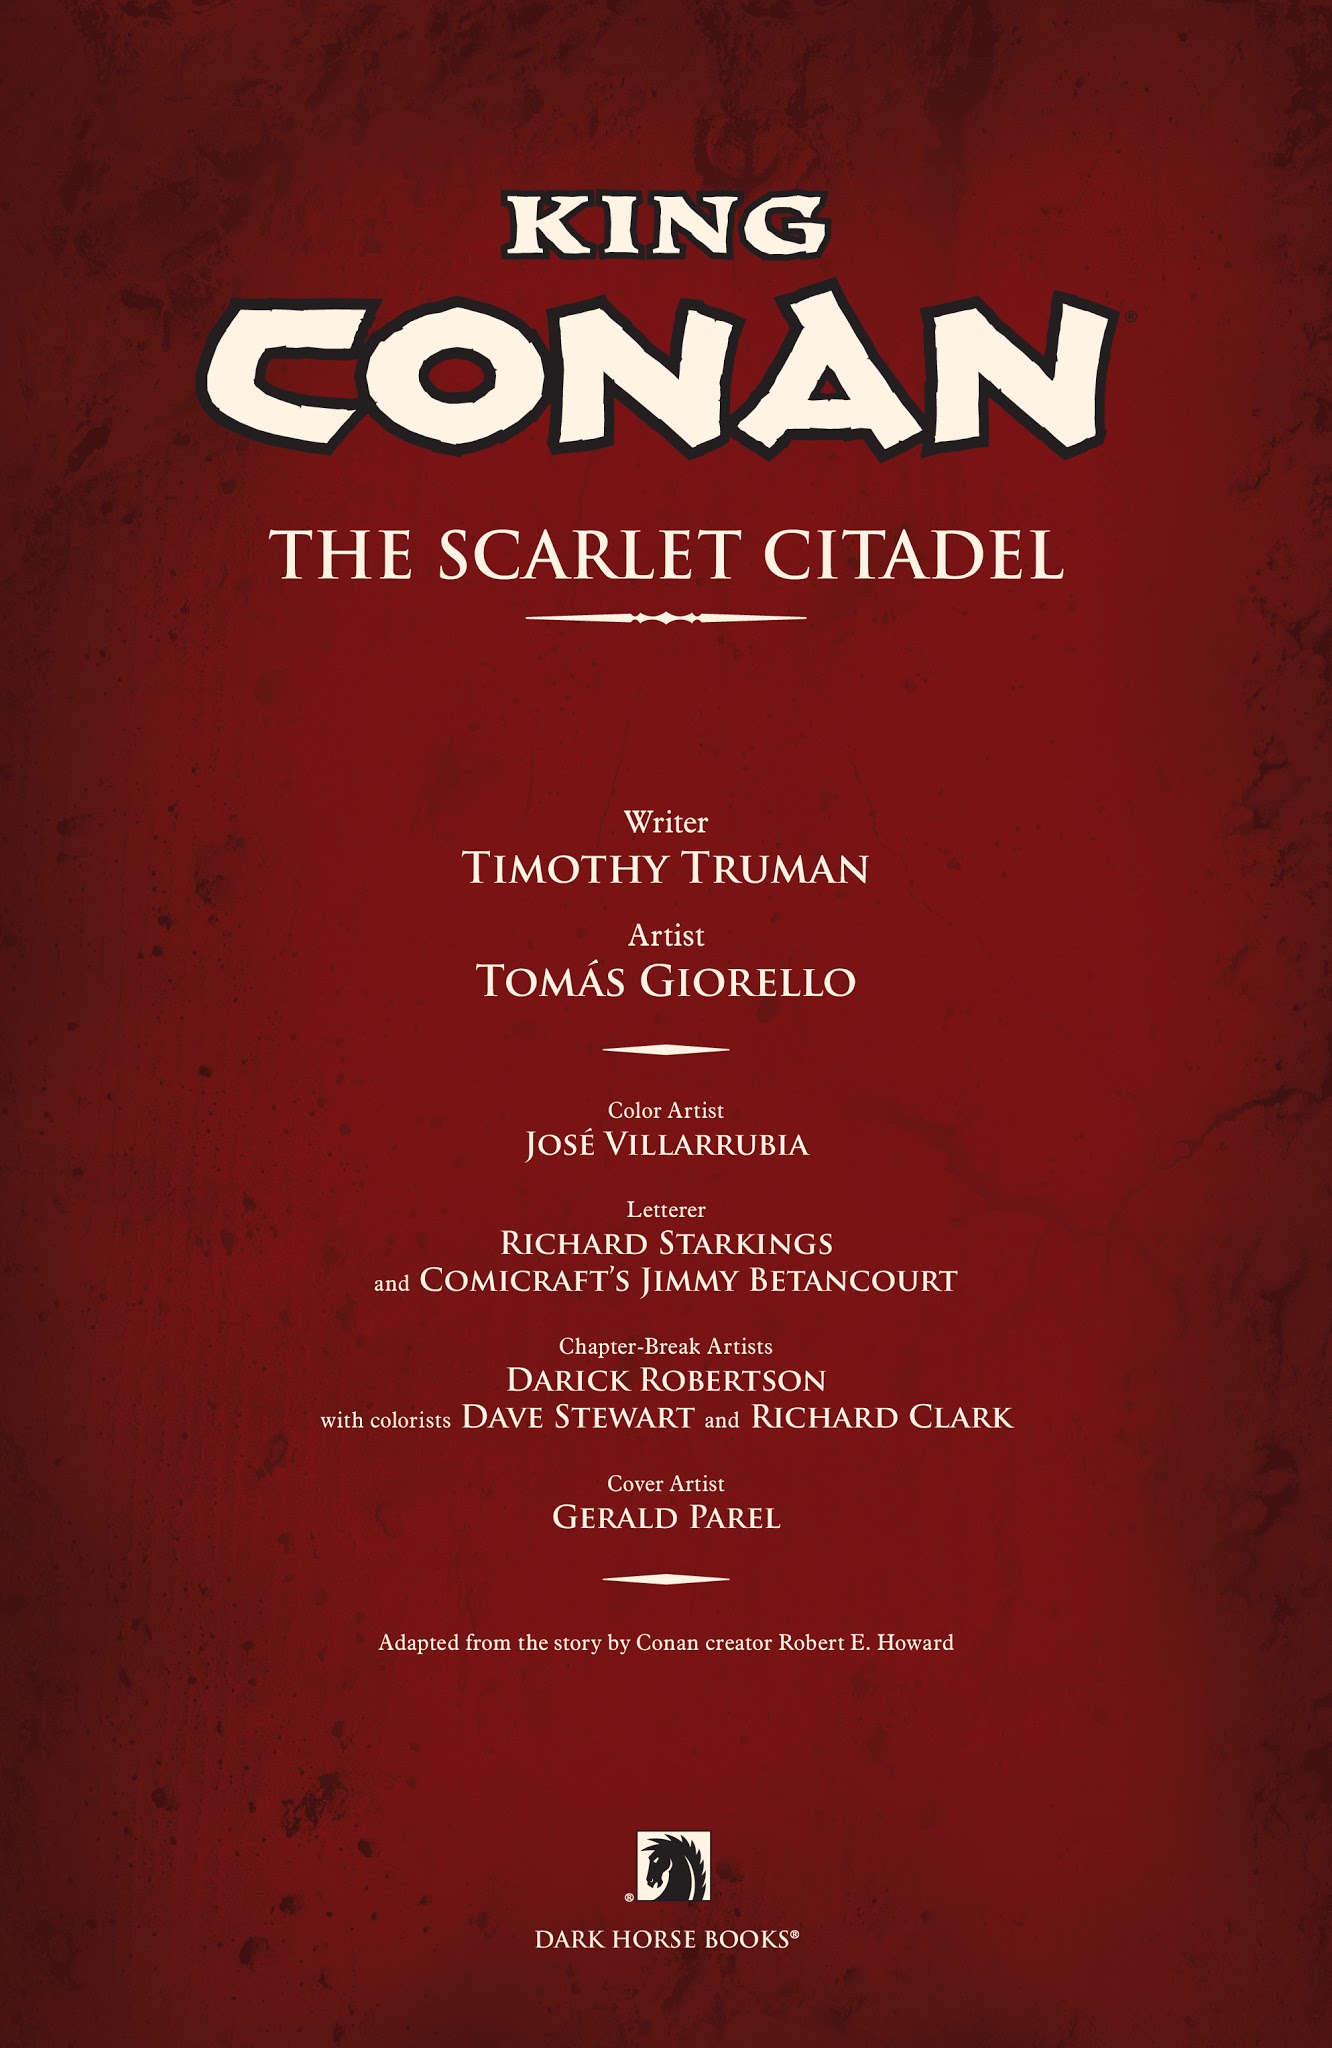 Read online King Conan: The Scarlet Citadel comic -  Issue # TPB - 5